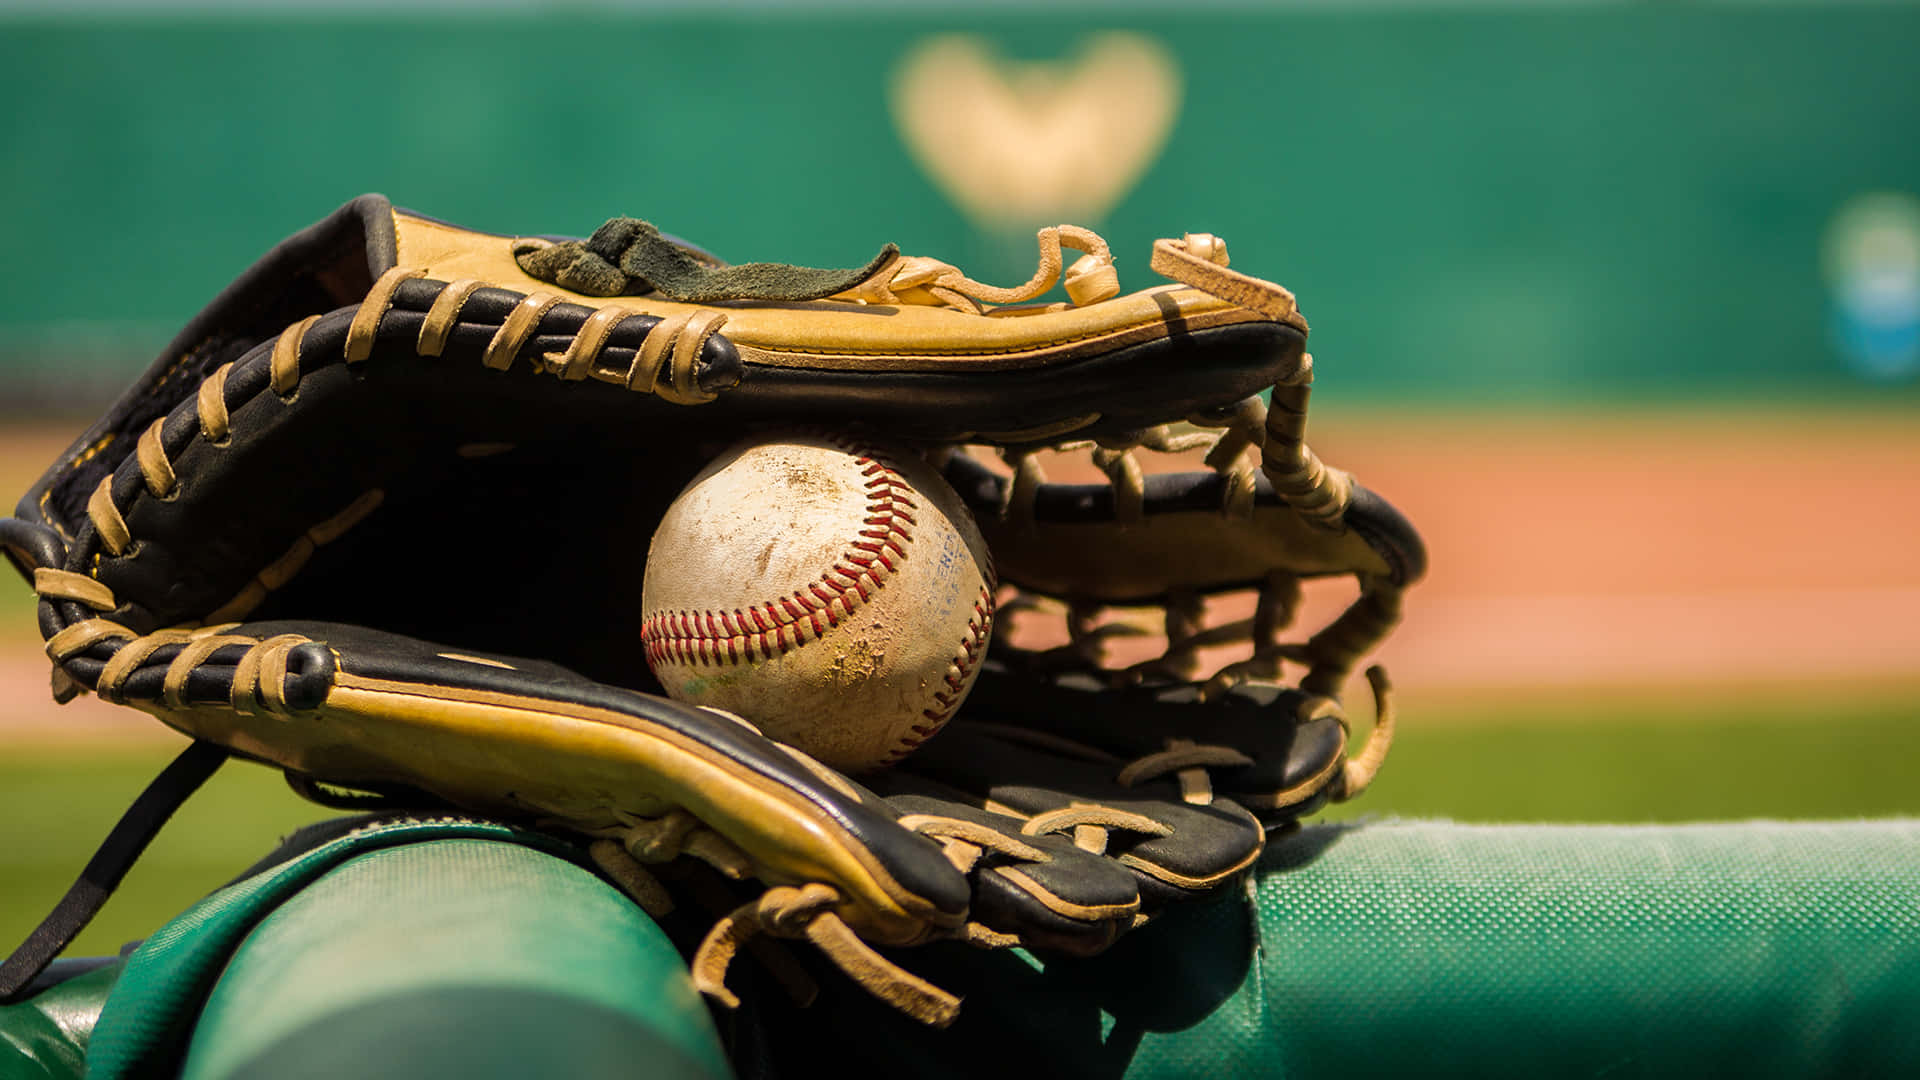 A close-up of a baseball glove on the field Wallpaper